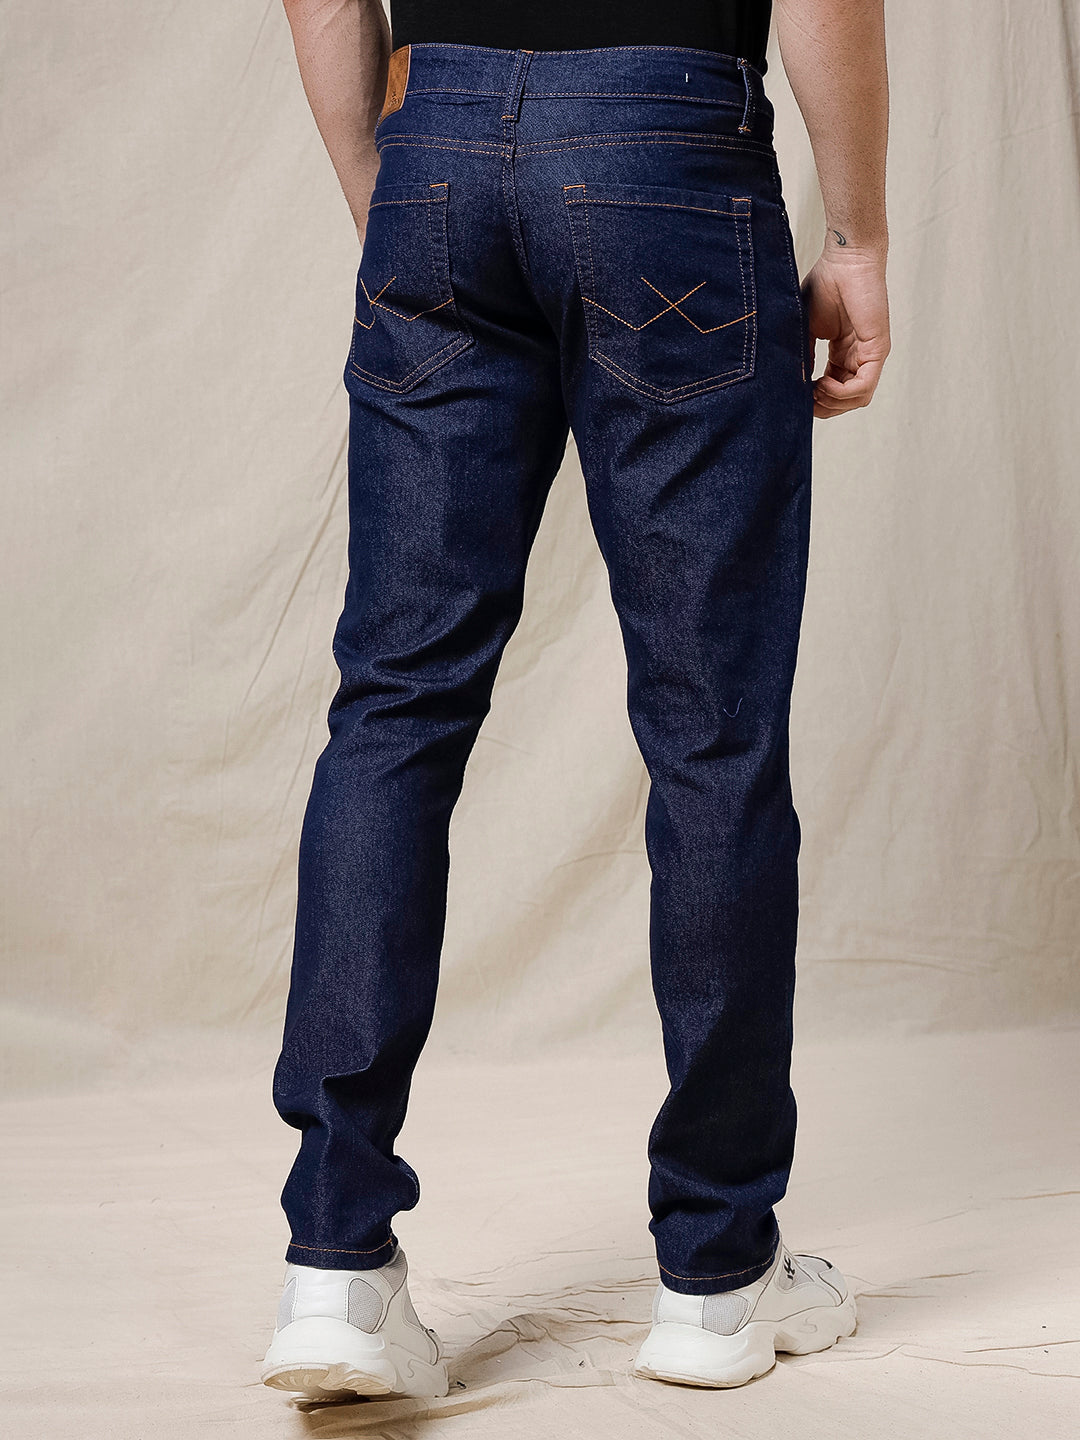 Solid Stone Slim Fit Jeans